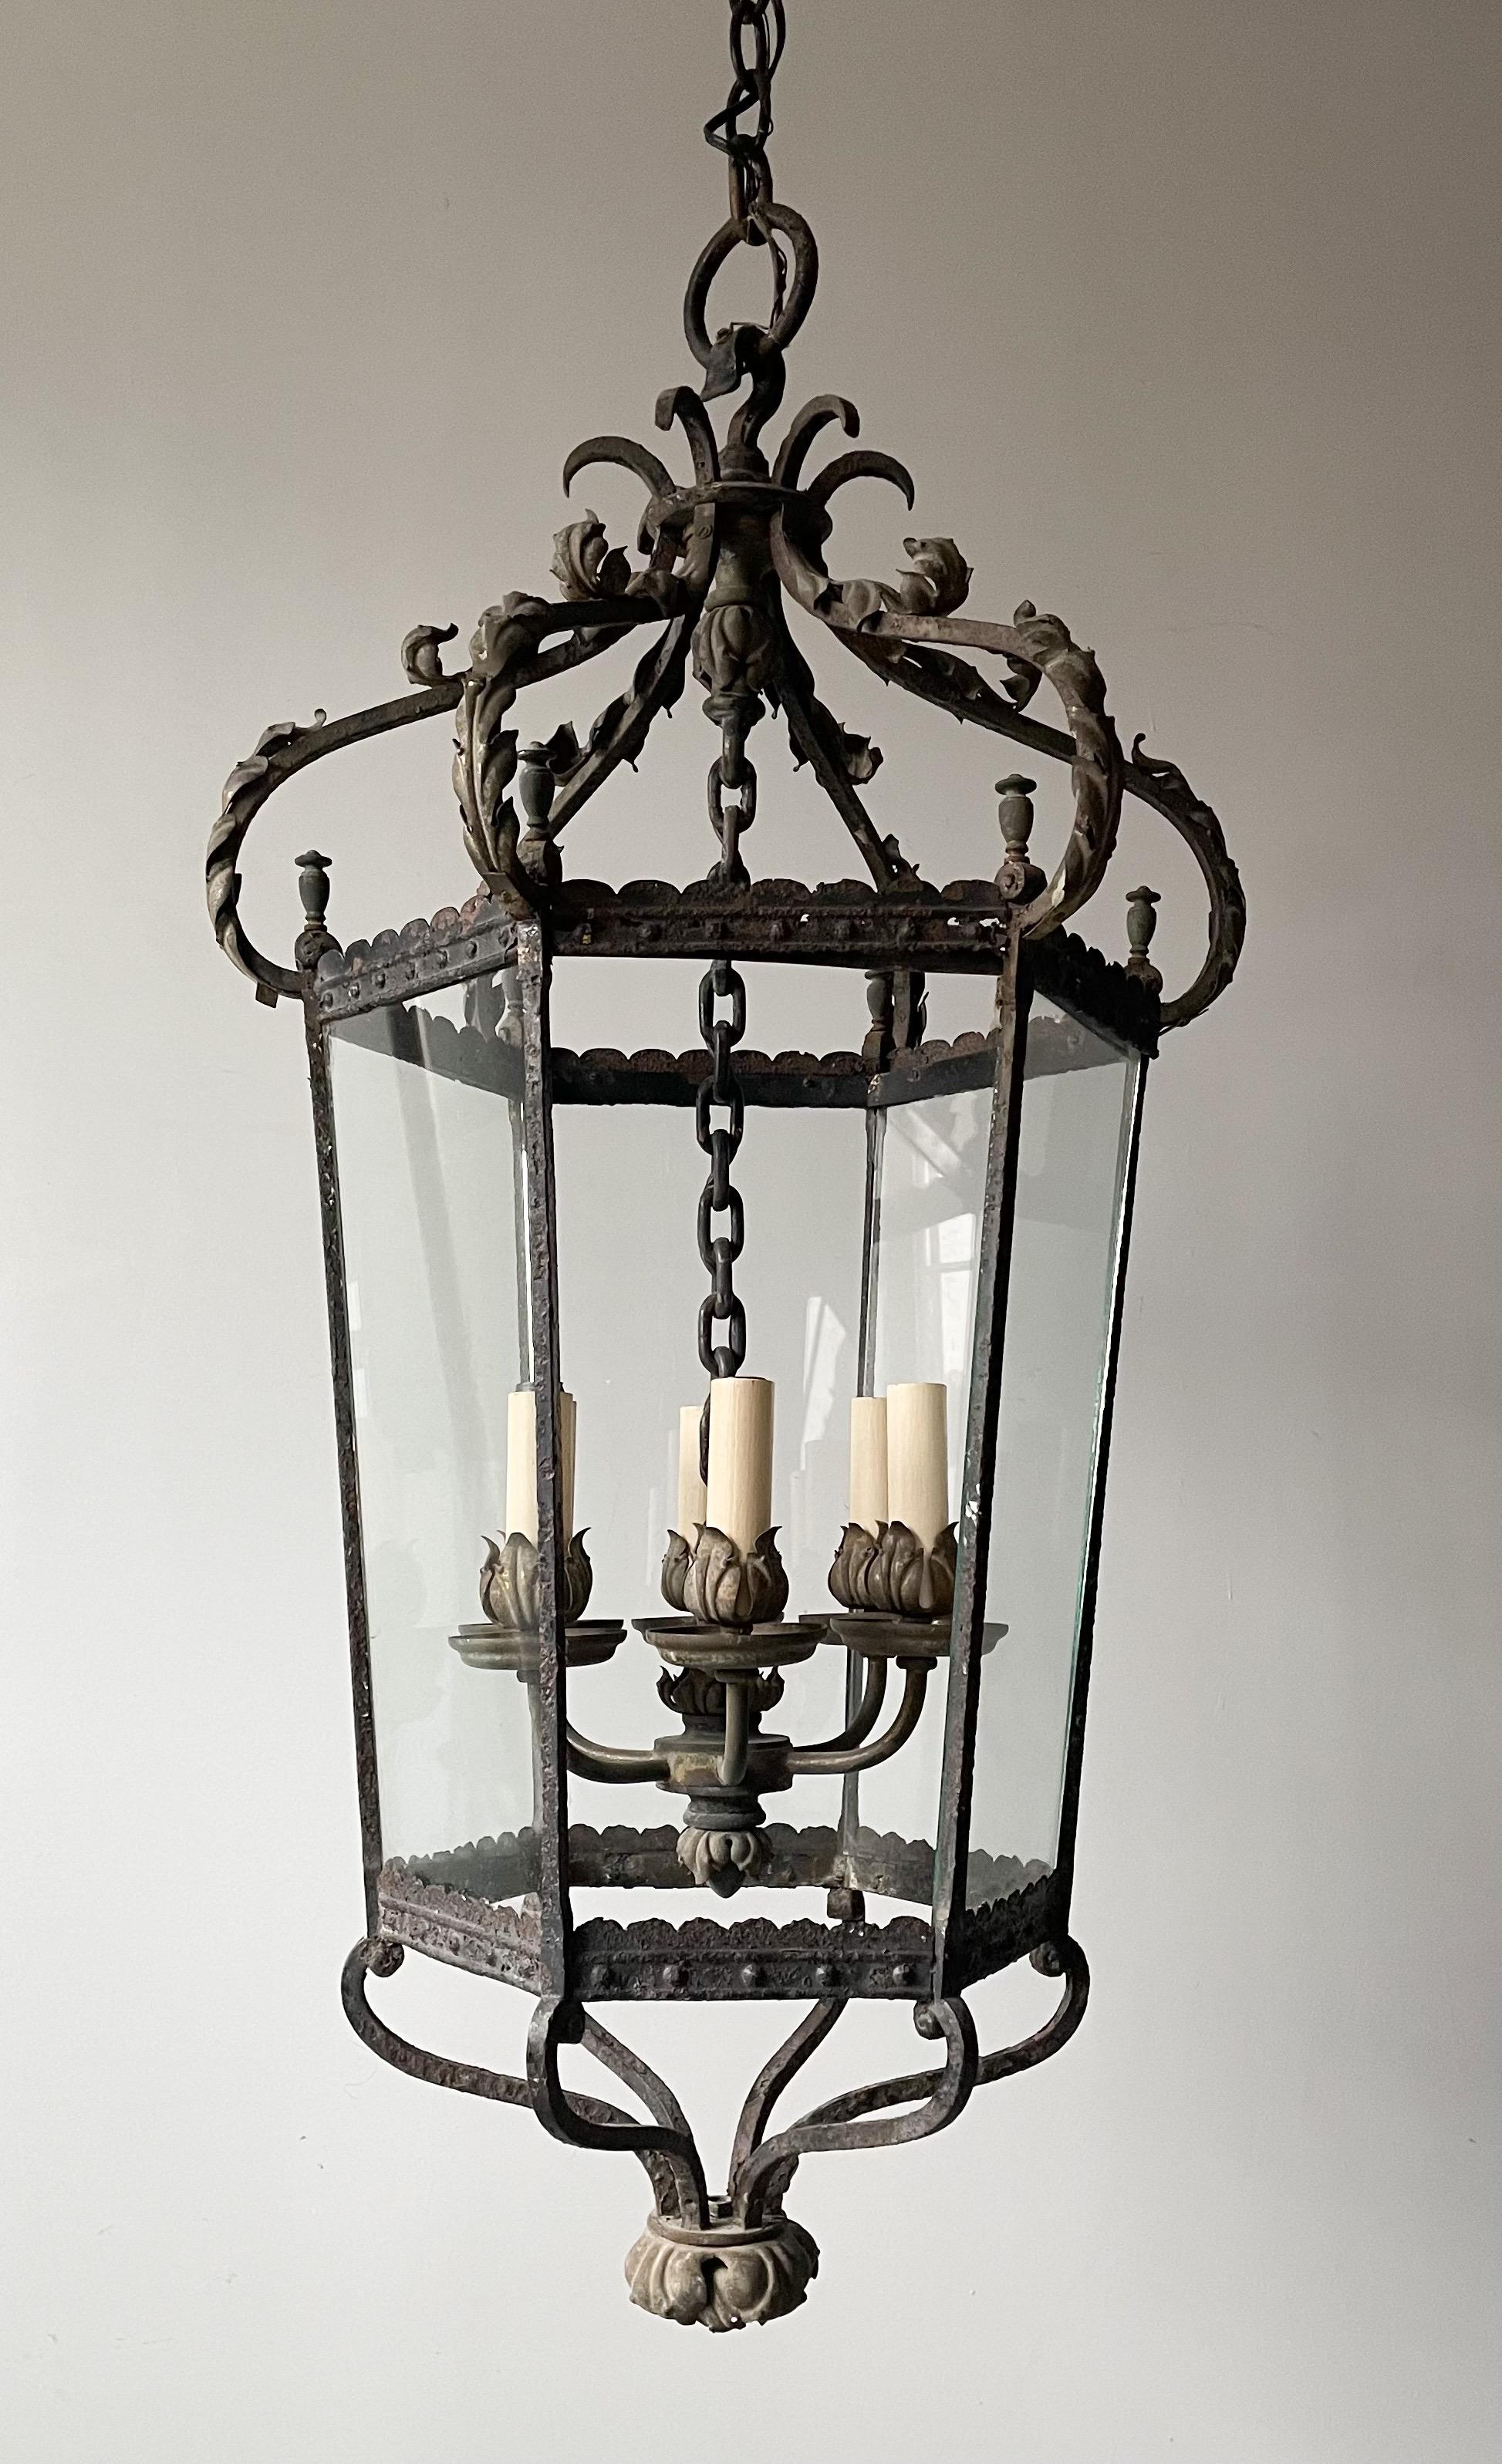 Beautiful, French 1940s iron and glass lantern in the Louis XV style.

The lantern consists of an iron frame with natural aged patina, it is decorated with acanthus leaves and filagree details. Six glass panels house 4 candelabra sockets. 

The